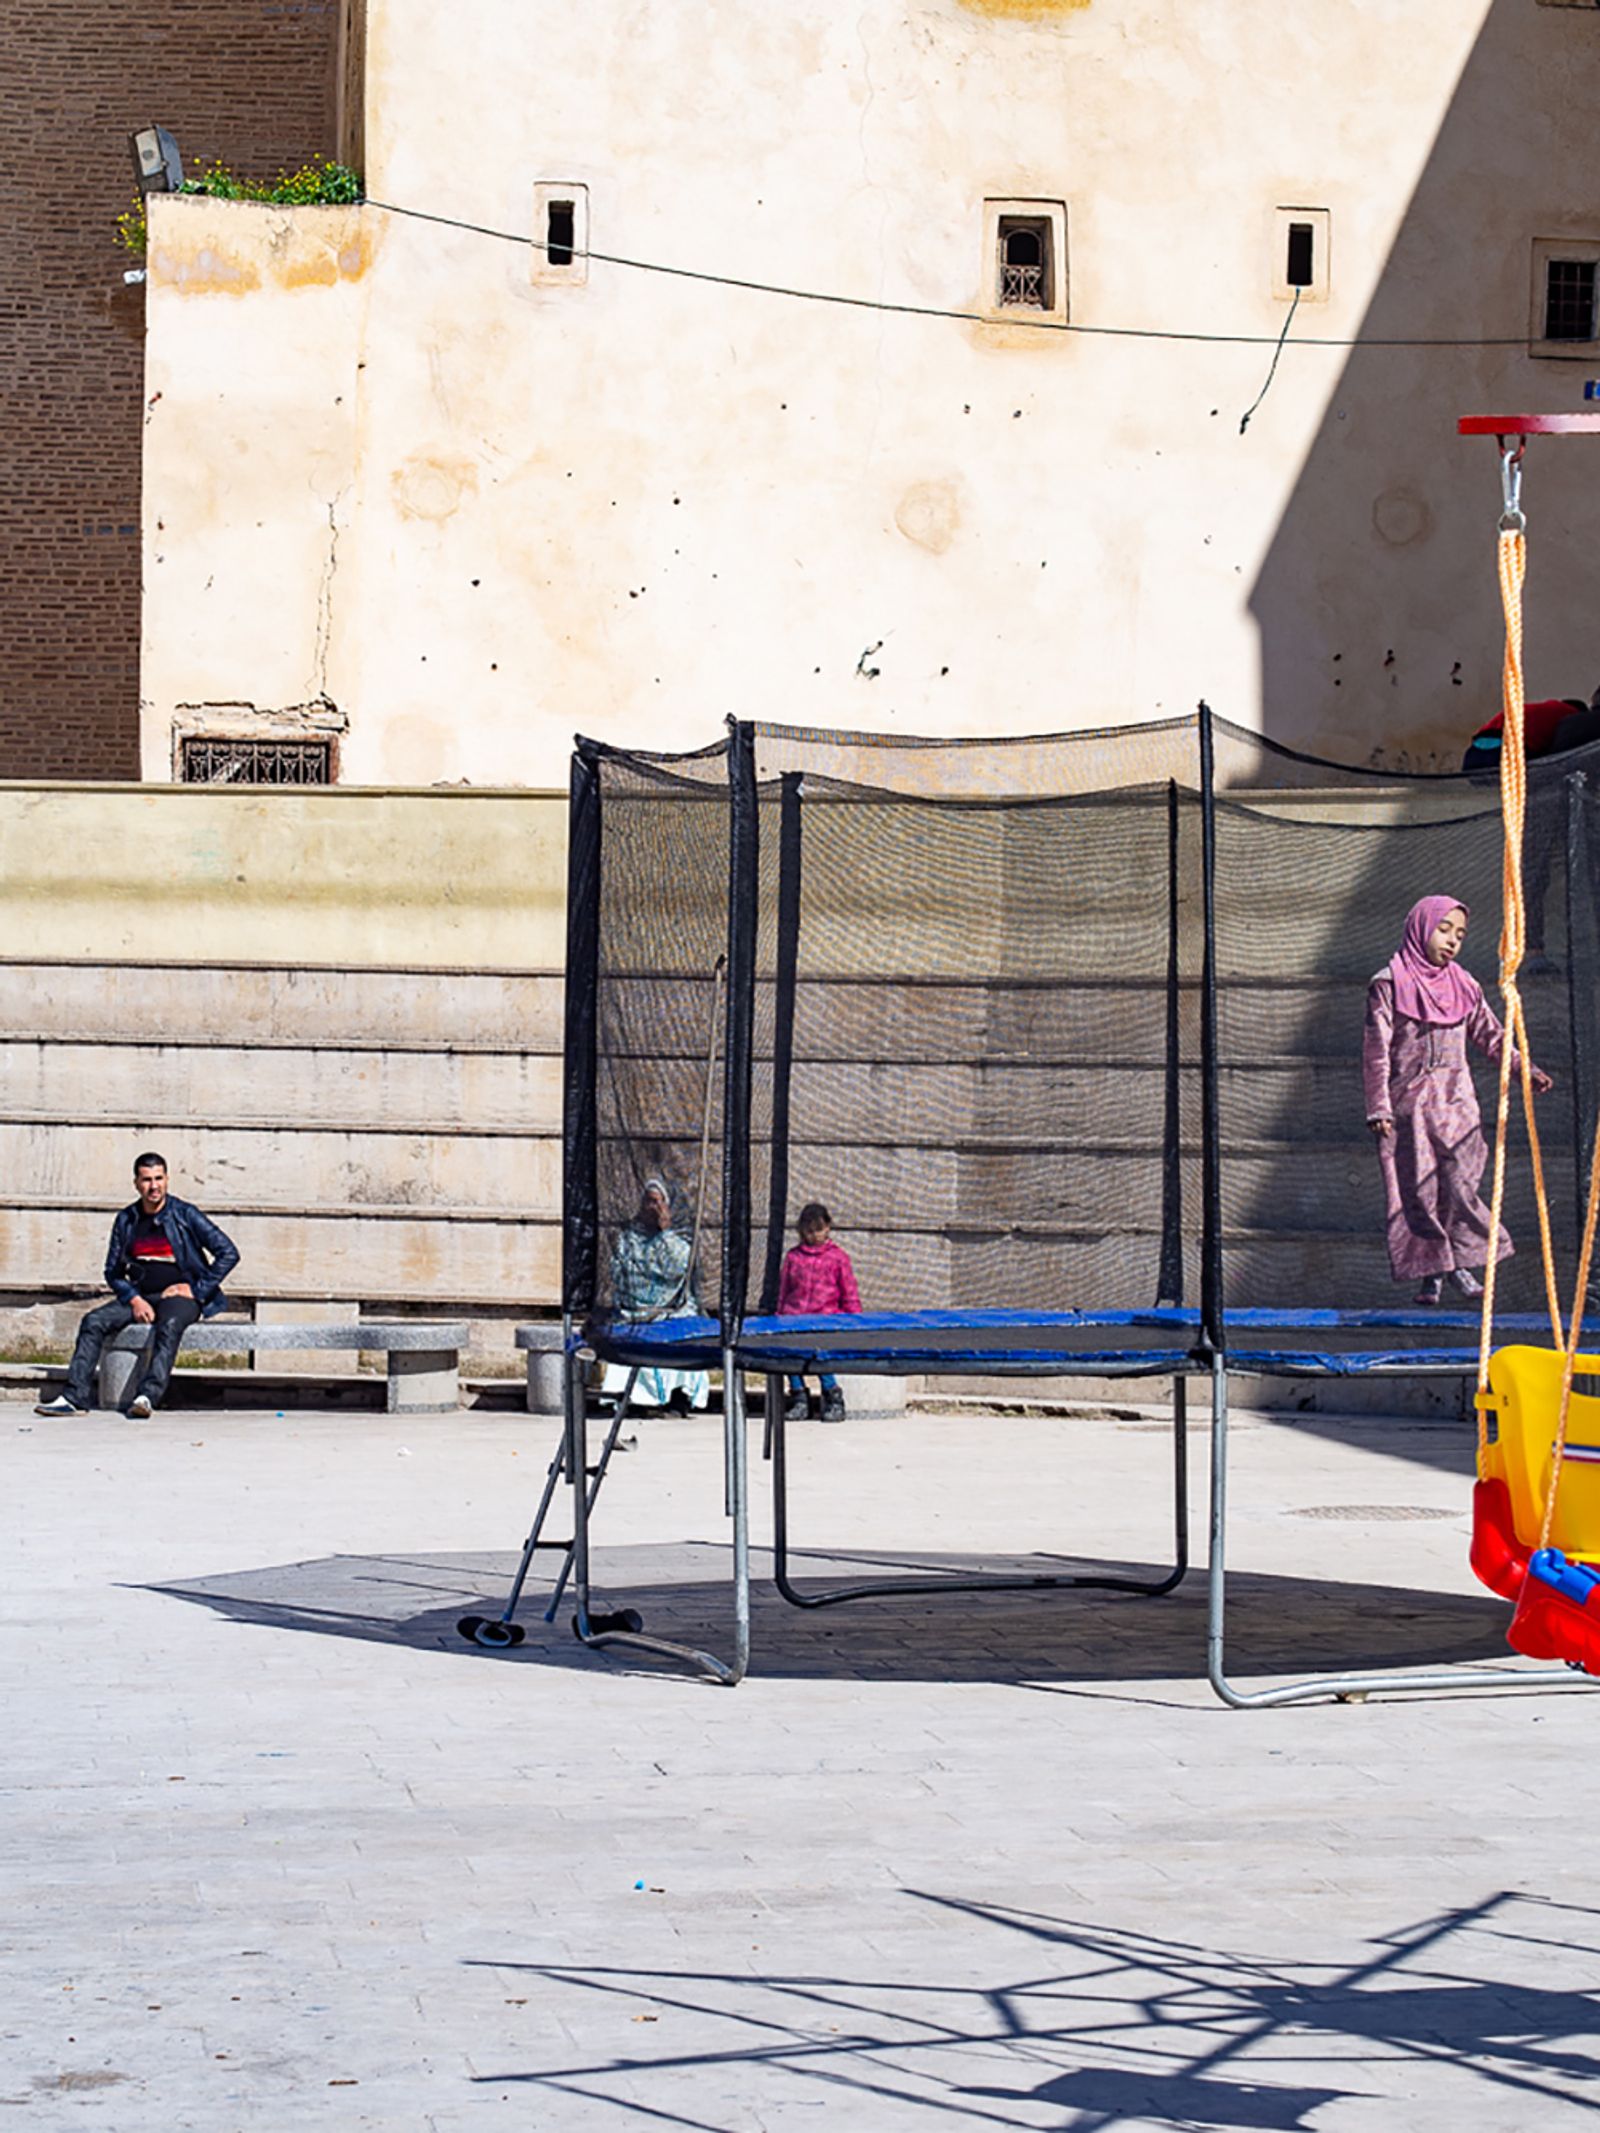 © Sina Opalka - Image from the Fragments of Moroccan Life photography project